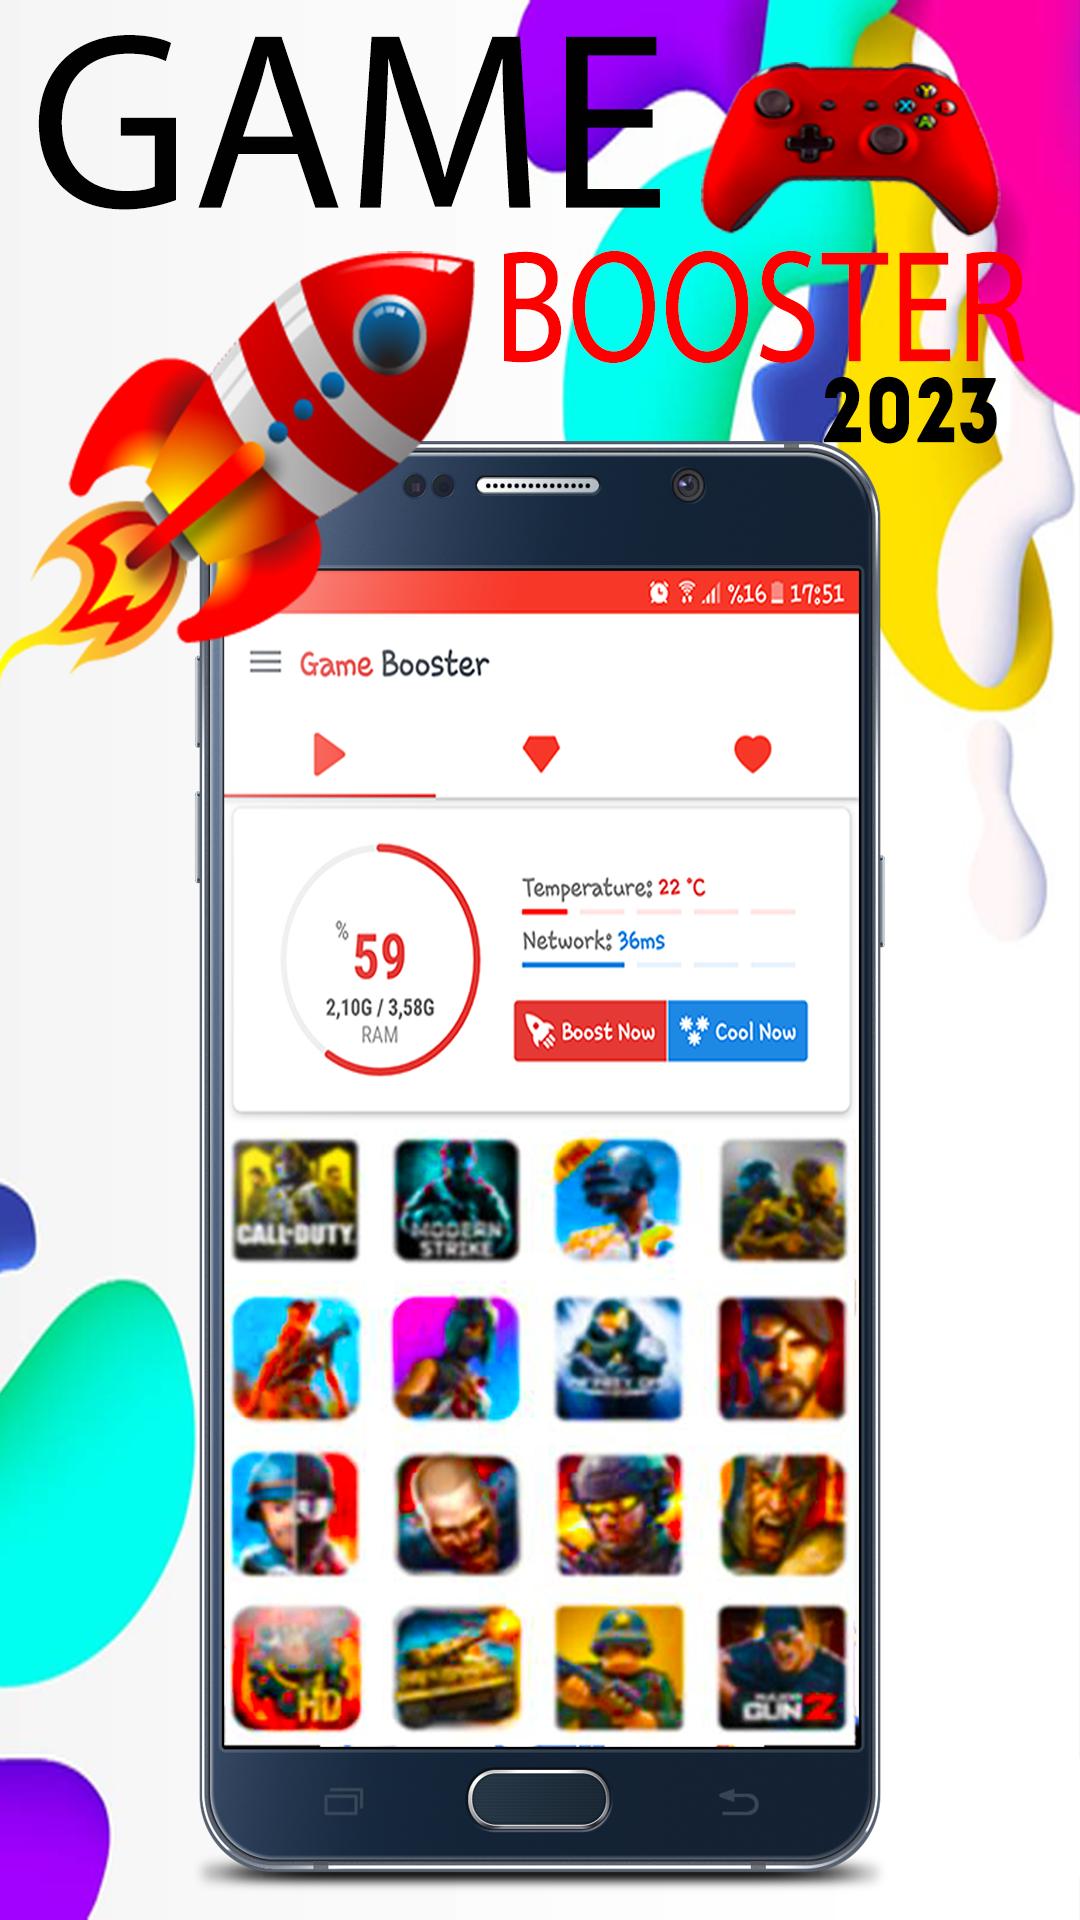 Game Booster 2023 for Android - APK Download